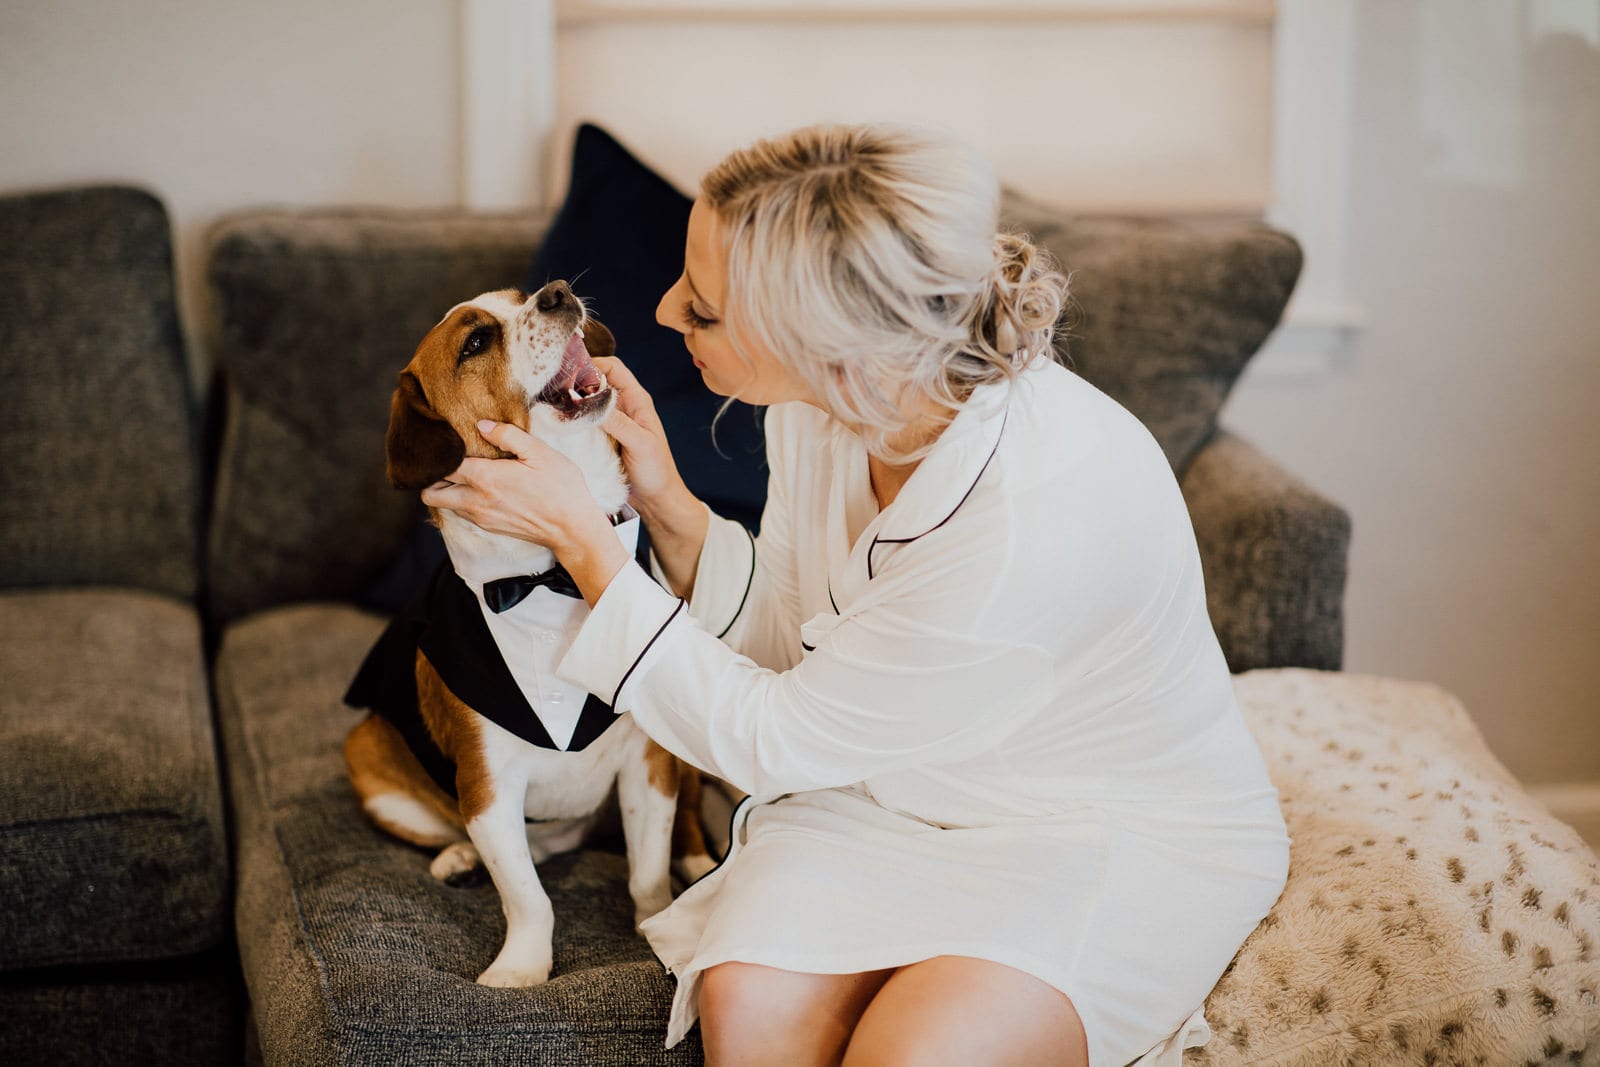 Bride smiles and plays with puppy in tuxedo